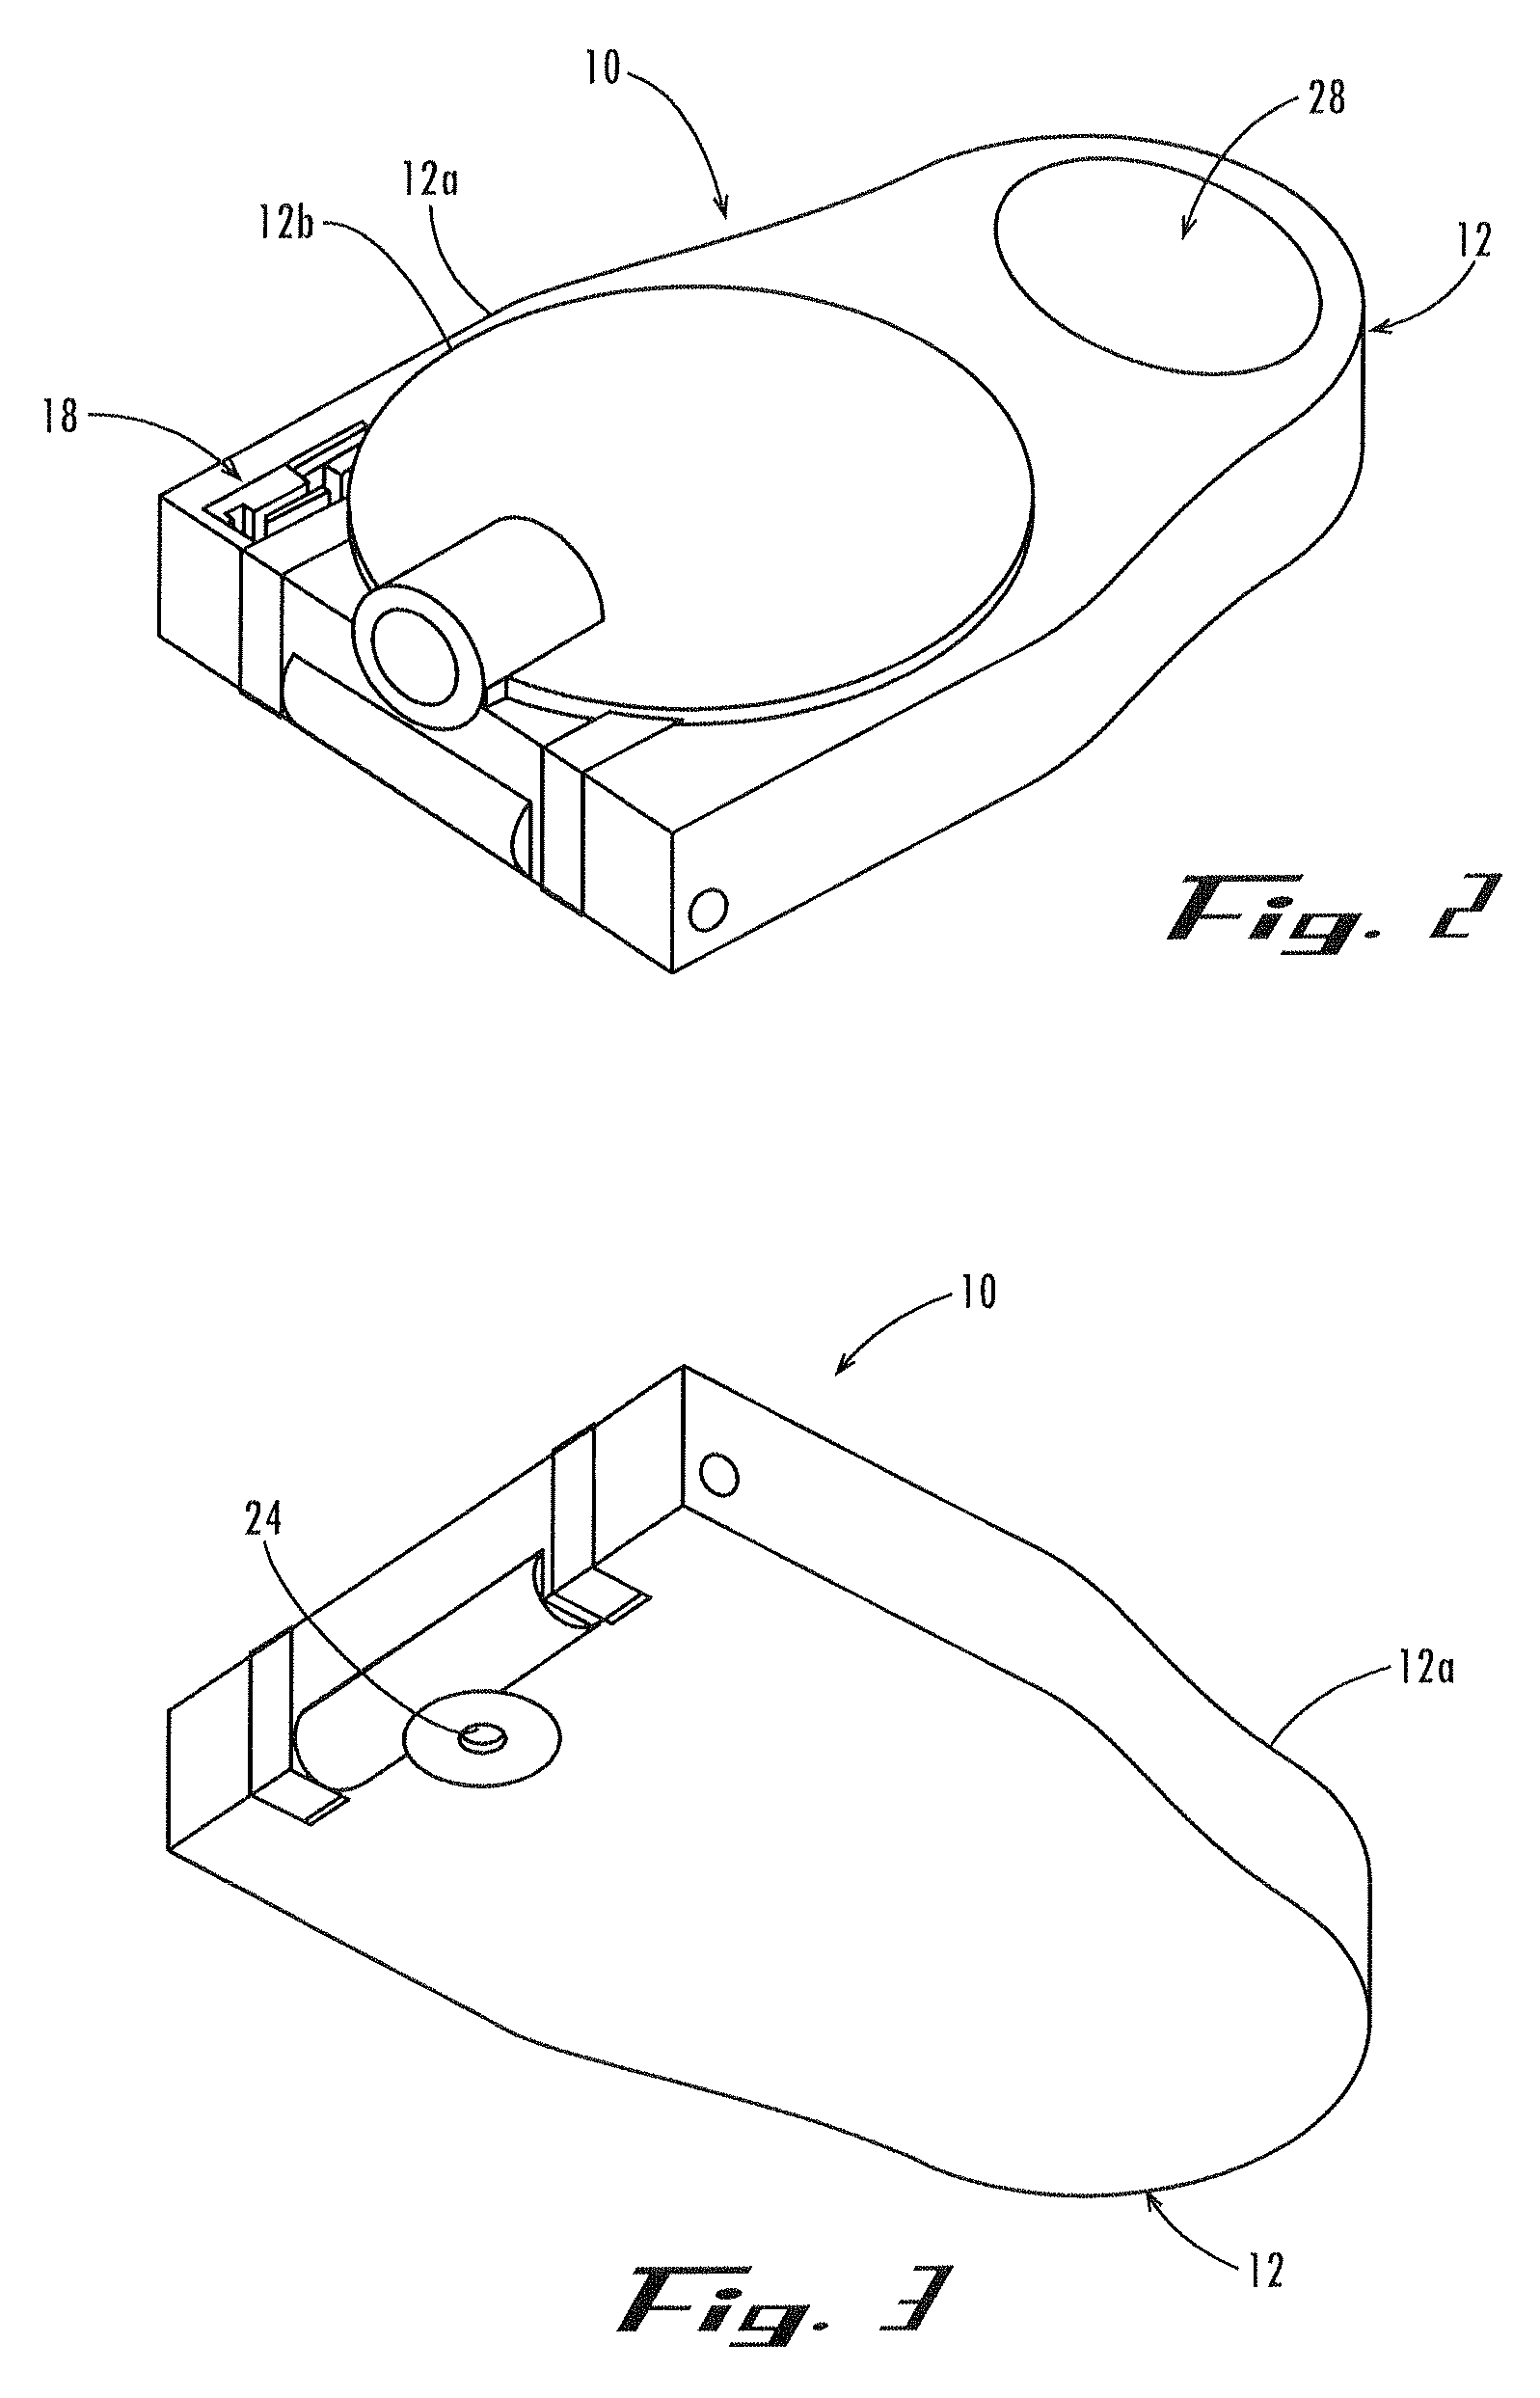 Multi-lancet device with sterility cap repositioning mechanism